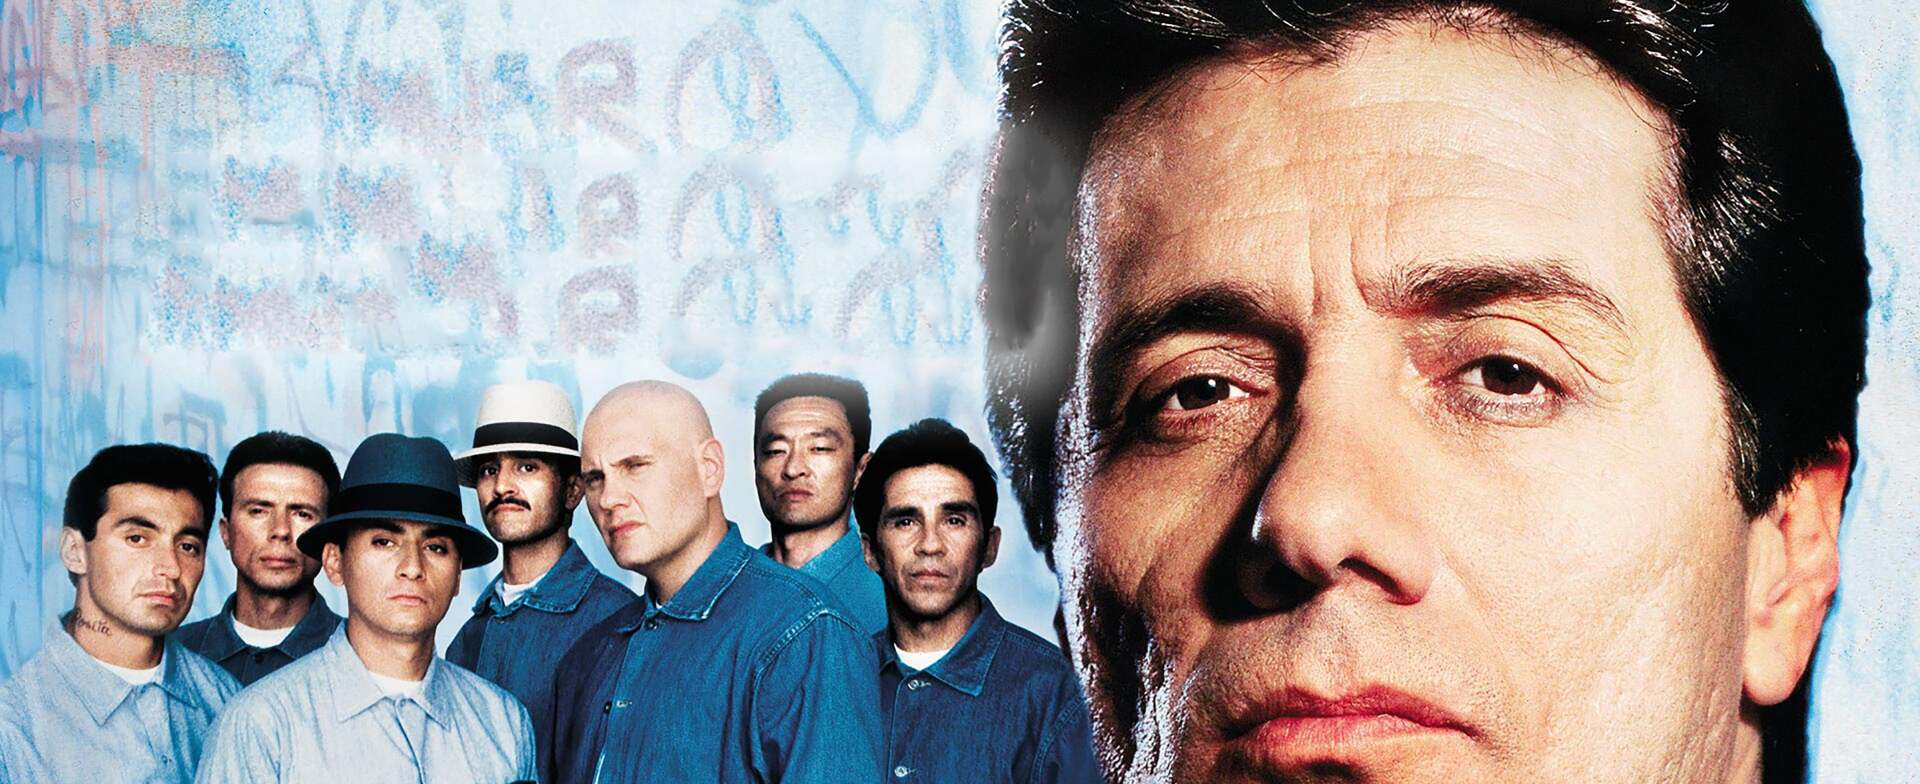 Regarder le film The Usual Suspects en streaming complet VOSTFR, VF, VO